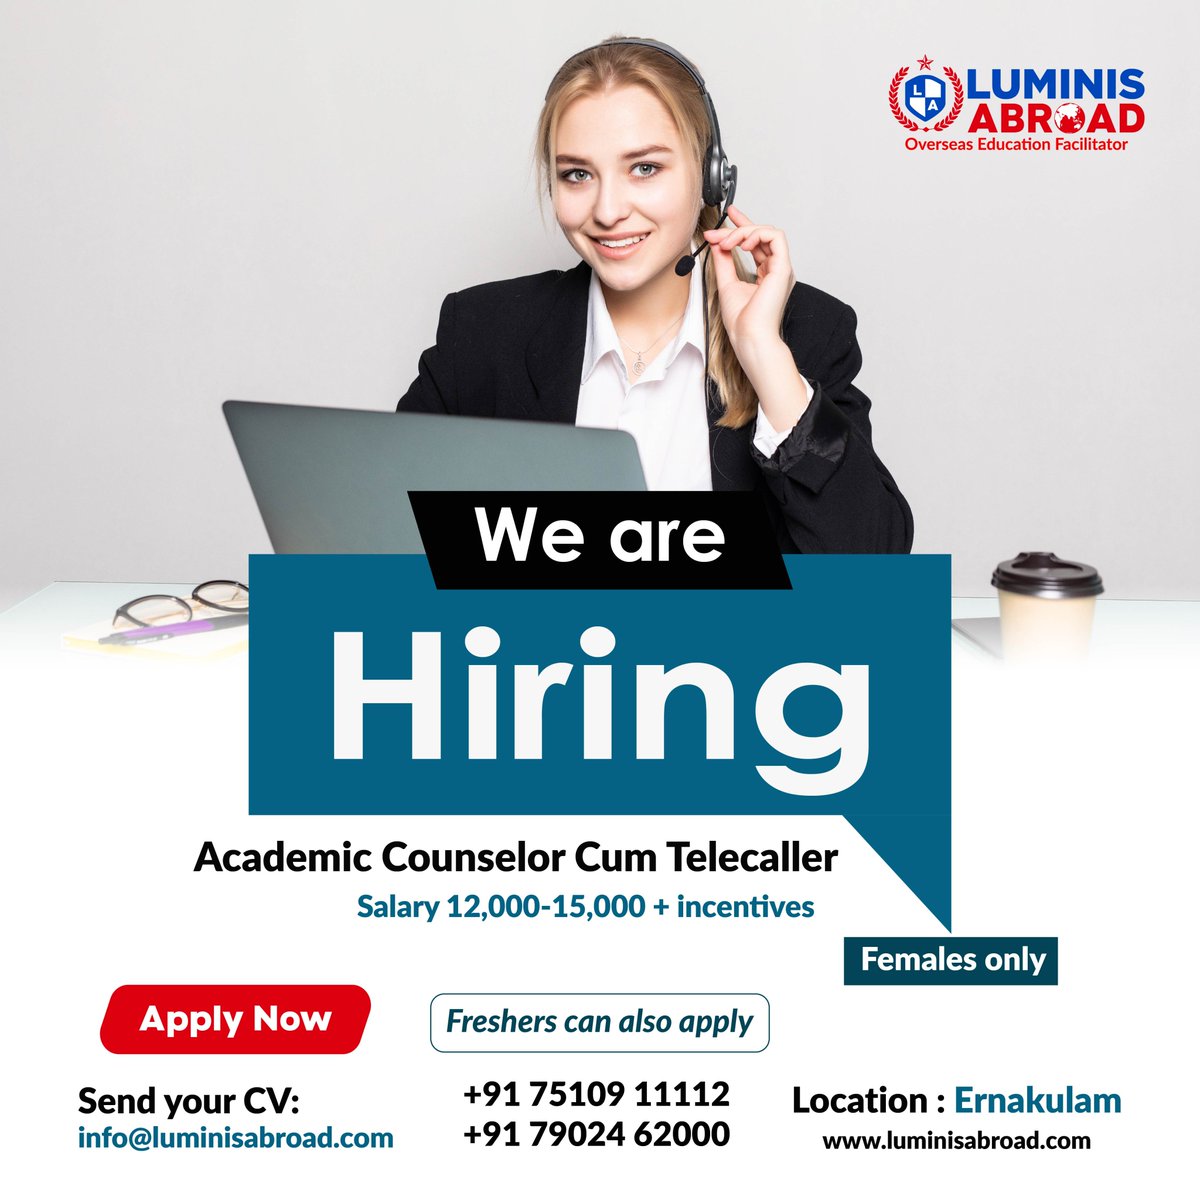 We are hiring urgently.
Candidates who have enough passion and enthusiasm can join our team. We are waiting for you...
Send your resume to wa.me/7902462000
#keralavacancy #jobvacancykerala #jobseekerskerala #freshersjob #luminisabroad #kochi